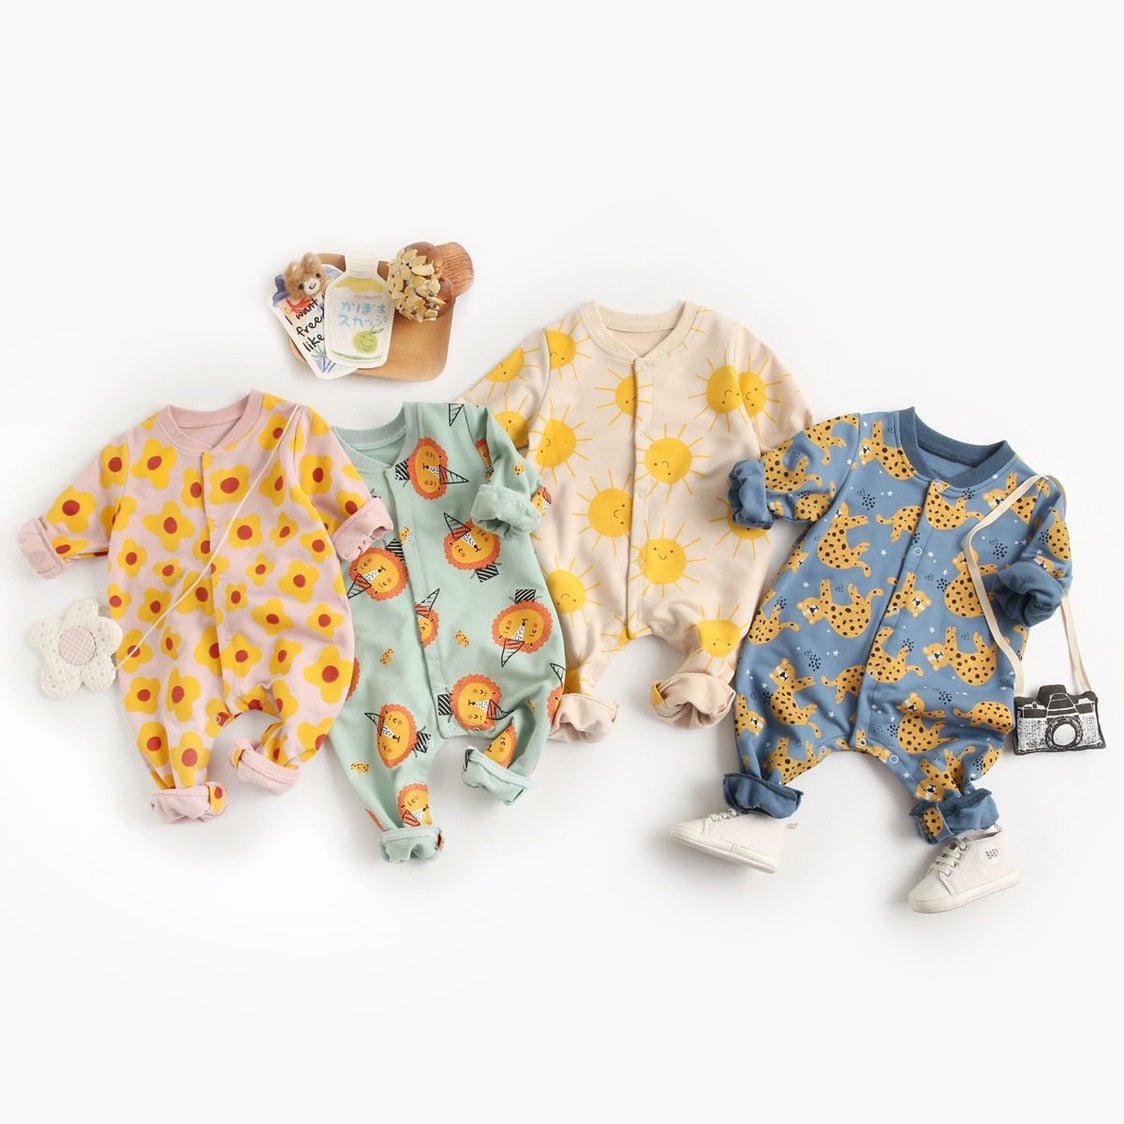 BRIGHT EARTHY BABY Sunshine Cotton Long-Sleeve Romper